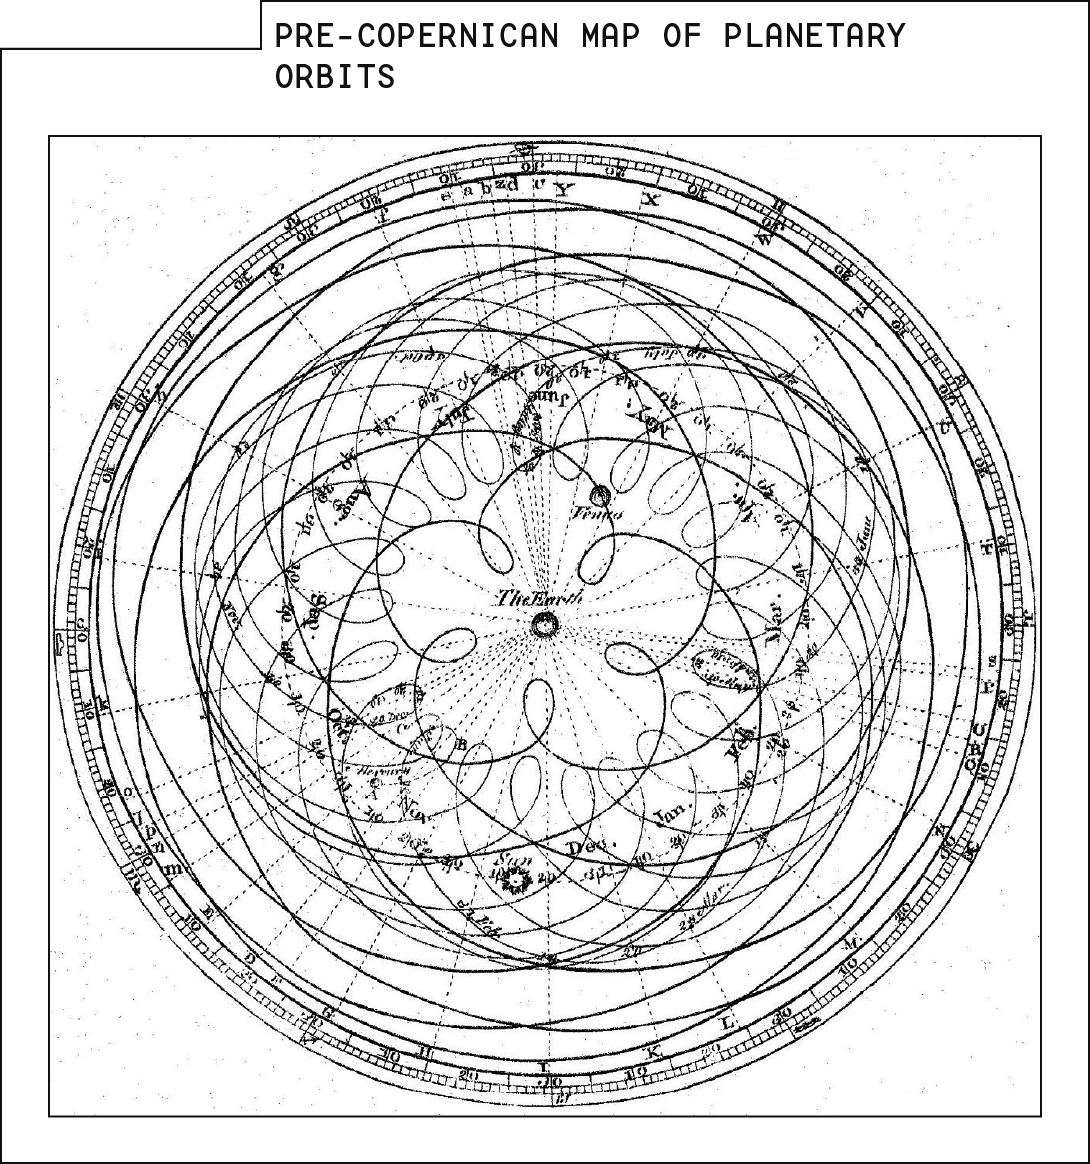 Diagram showing planetary orbits in a pre-Copernican model. The Ptolemaic model required dozens of "epicycles" to explain the observed position of bodies in orbit around the earth.